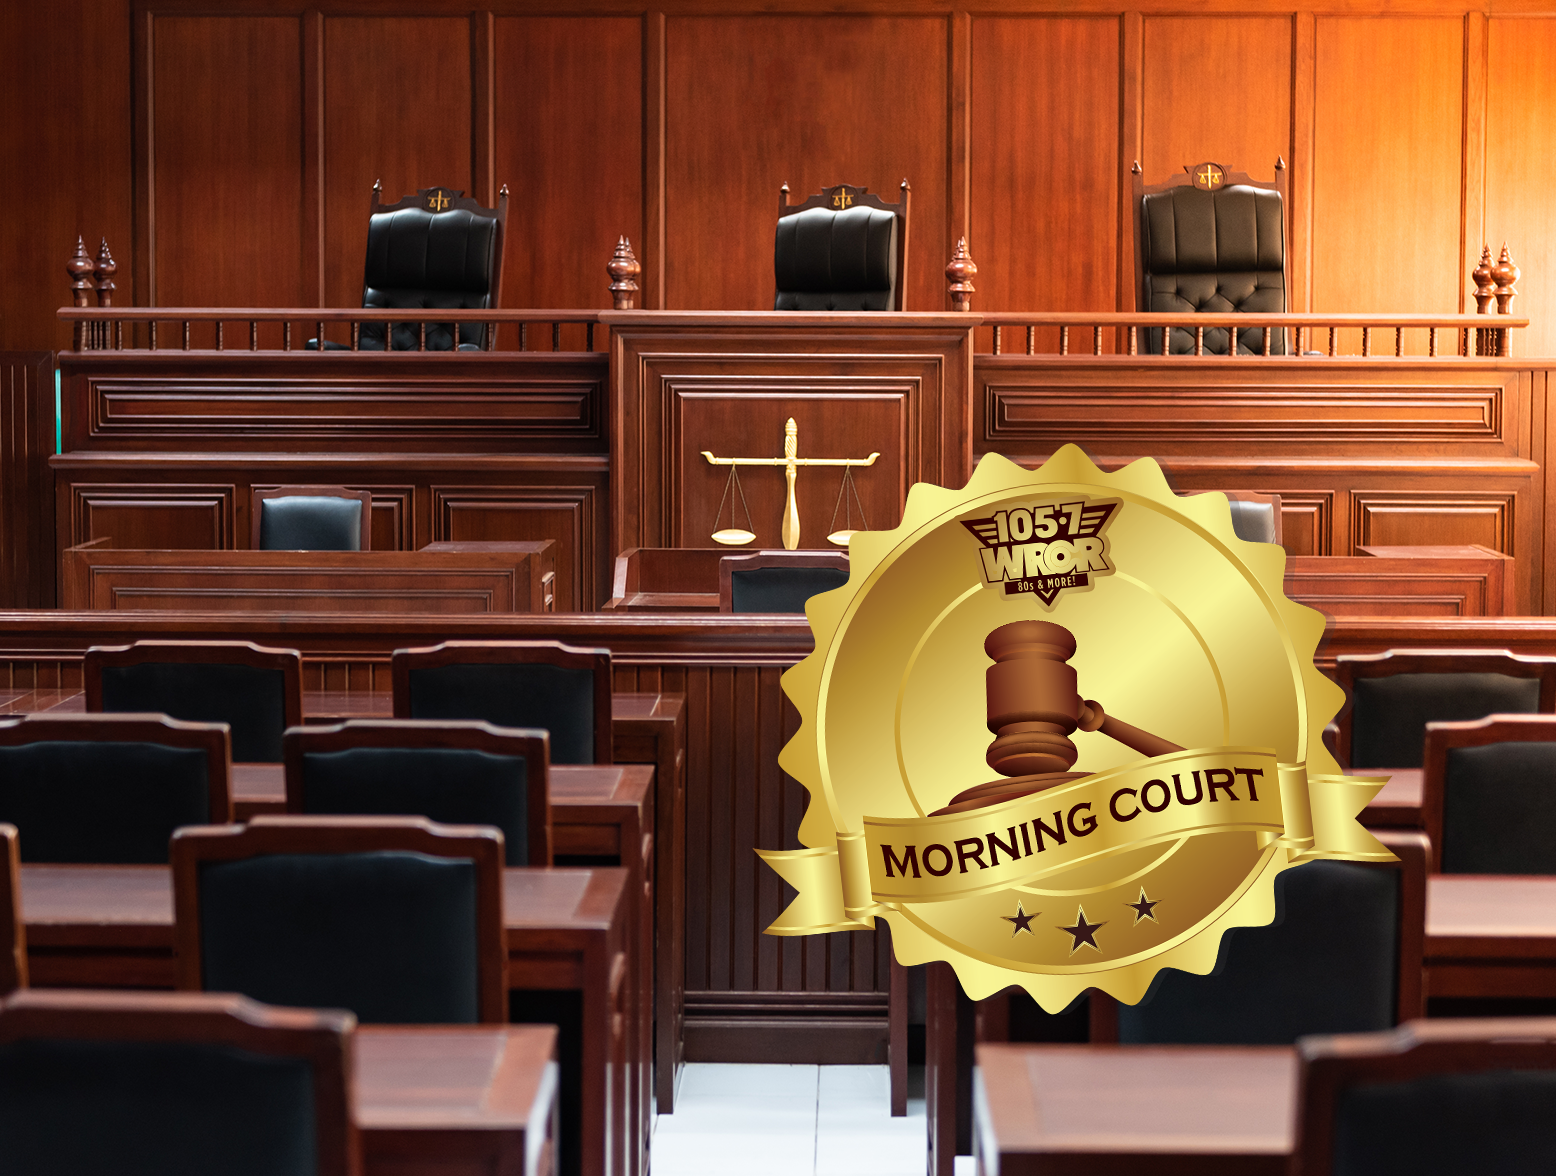 Morning Court Case of Private Eyes Watching Who?! 7/27 - The ROR Morning Show Podcast